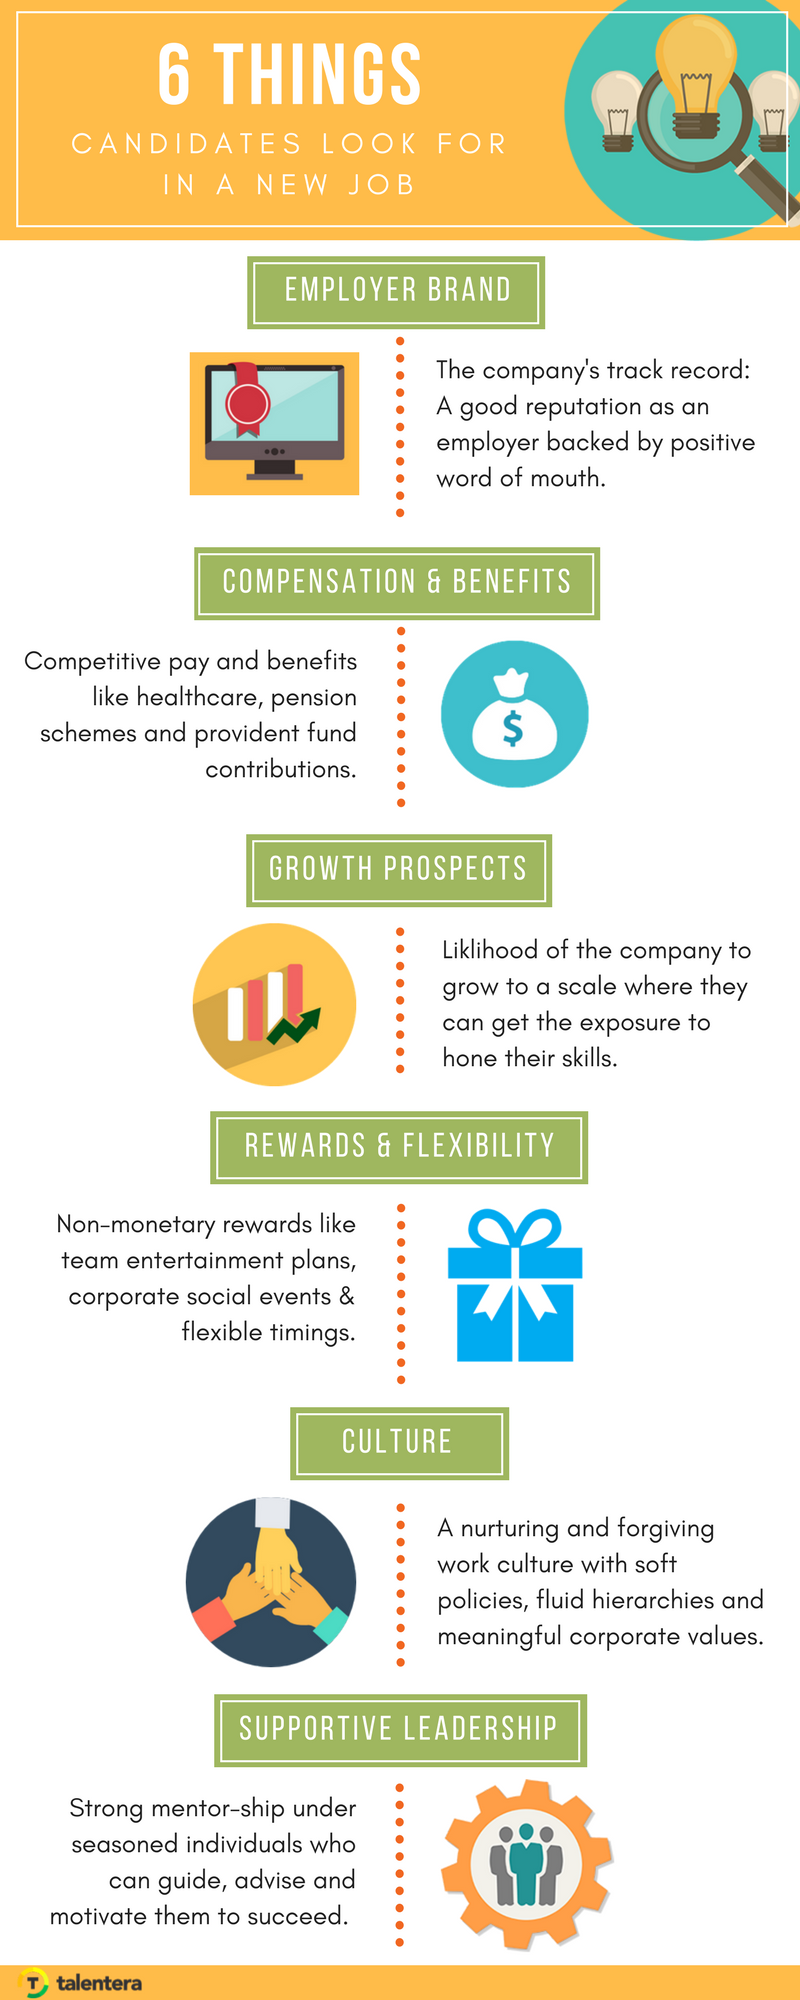 6 Things Candidates Look for in a New Job - Infographic | Talentera